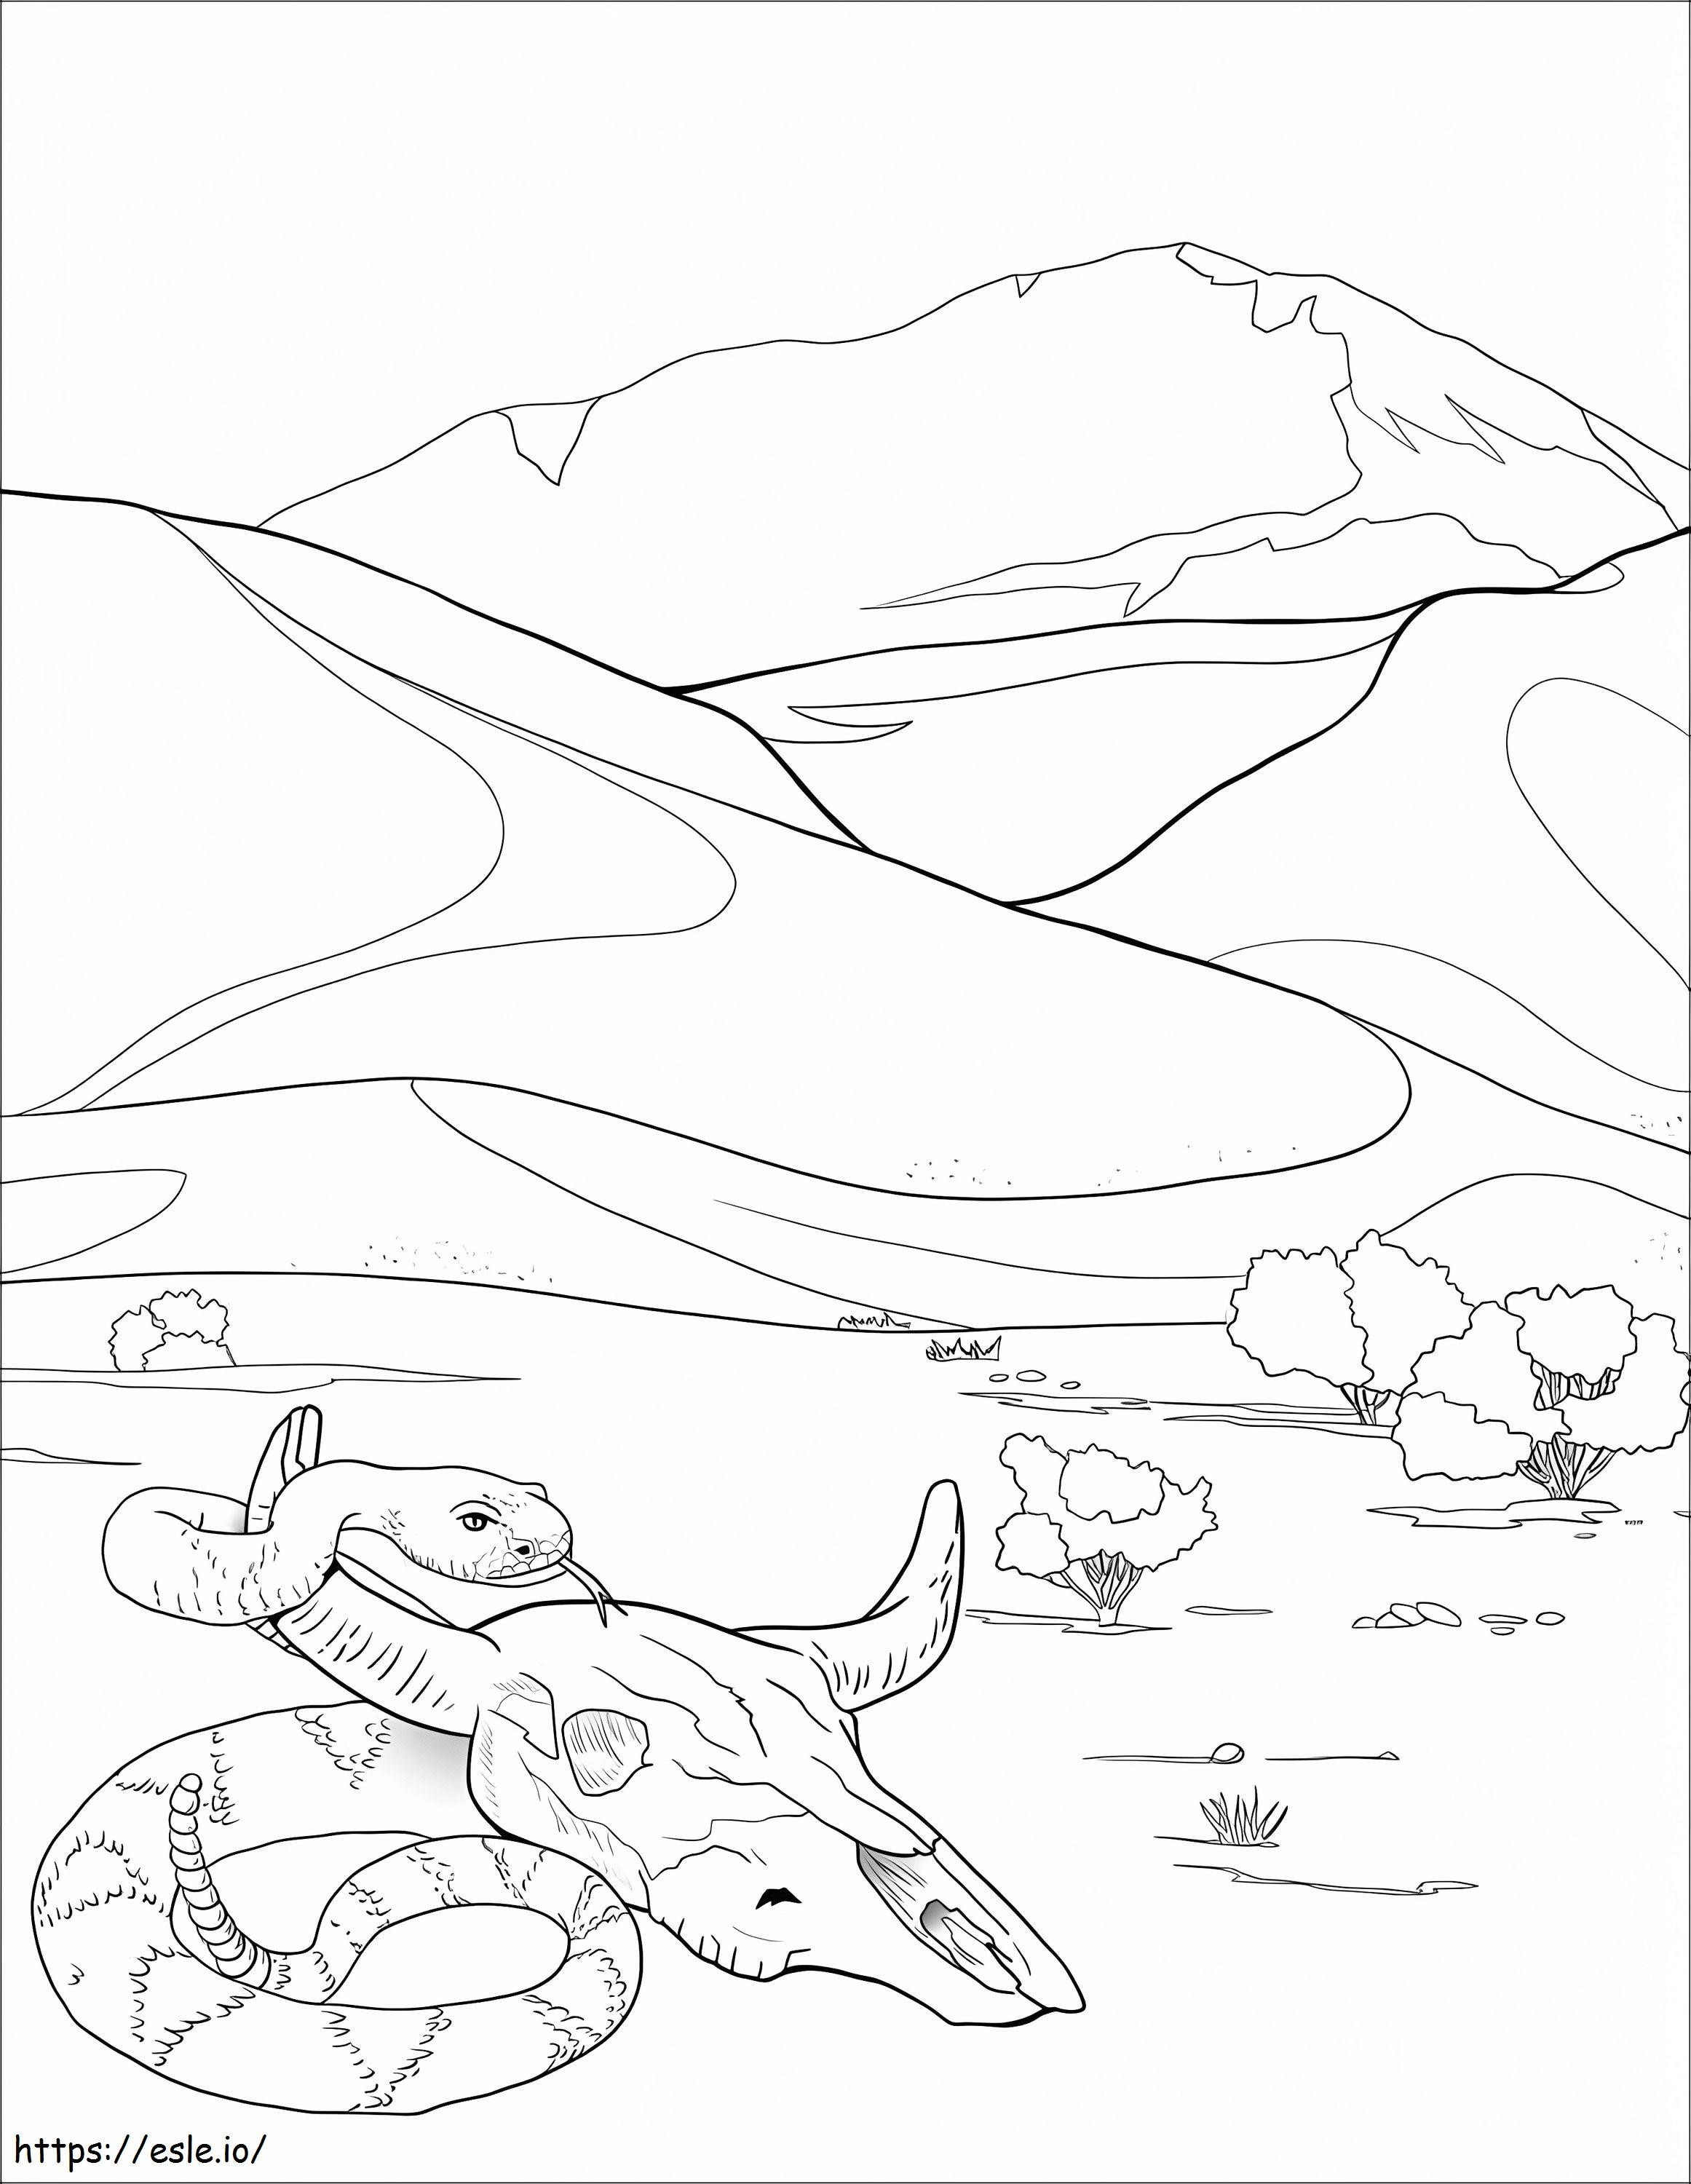 Death Valley National Park coloring page